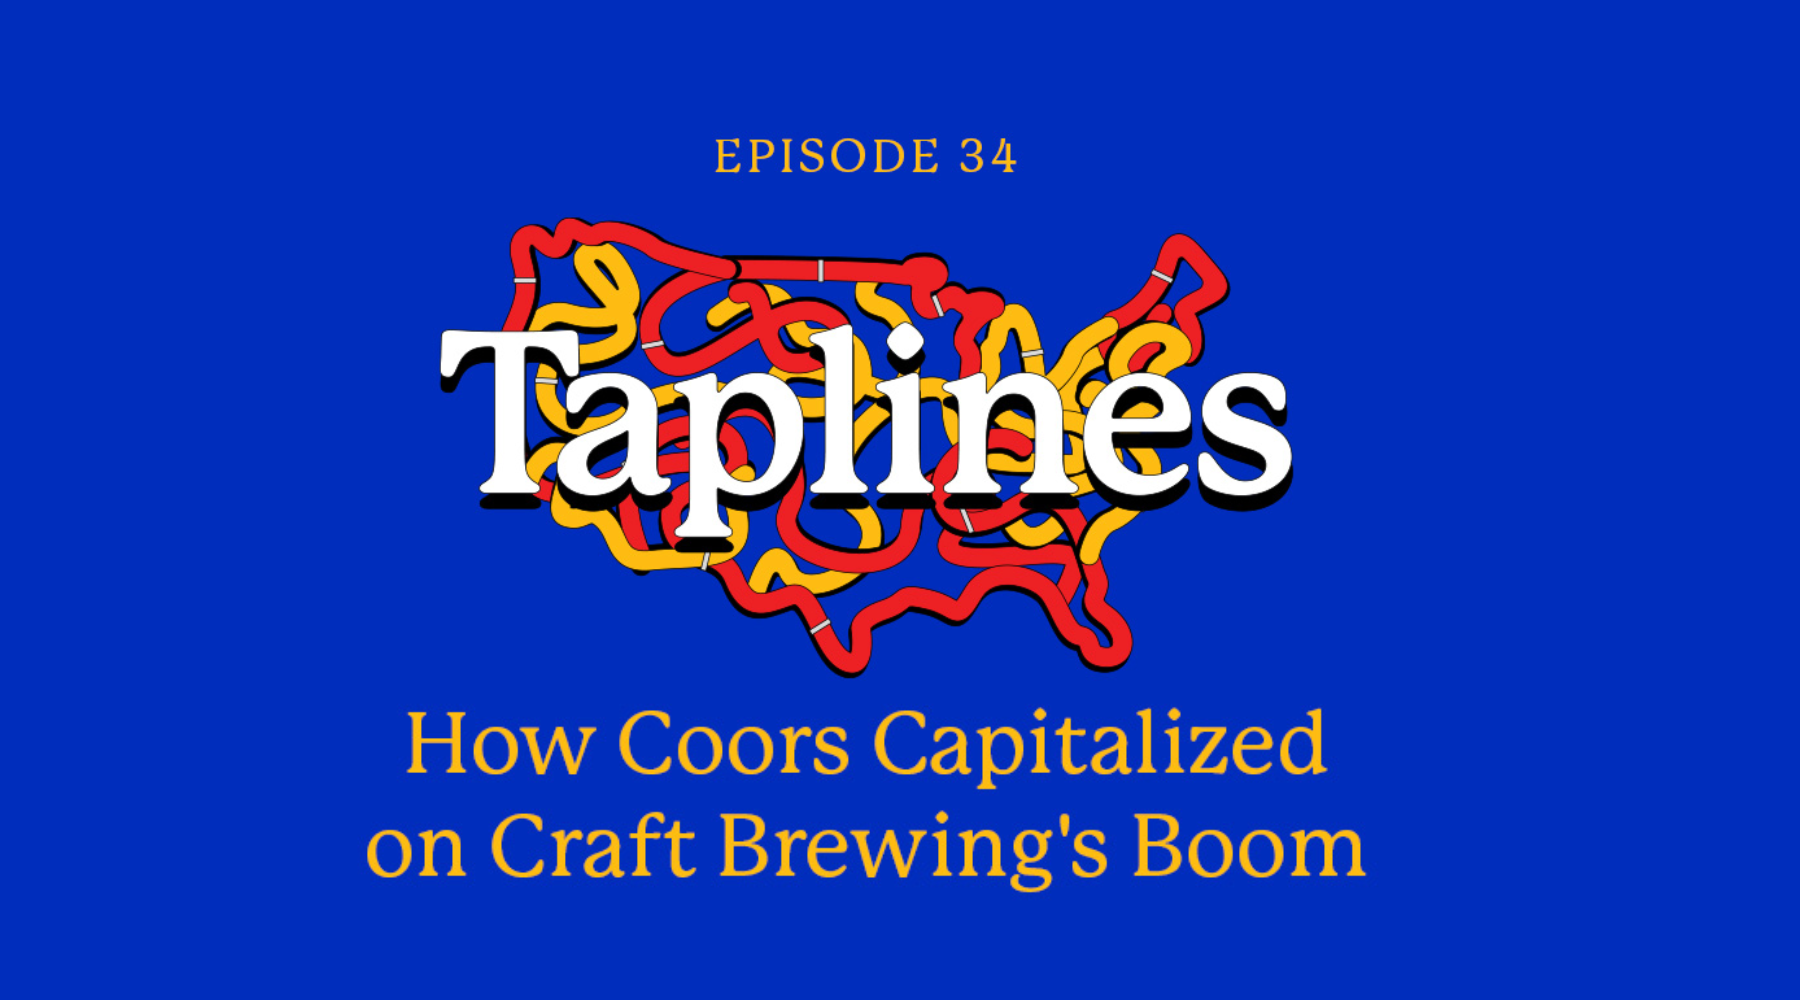 Vinepair Podcast Taplines: How Coors Capitalized on Craft Brewing’s Boom